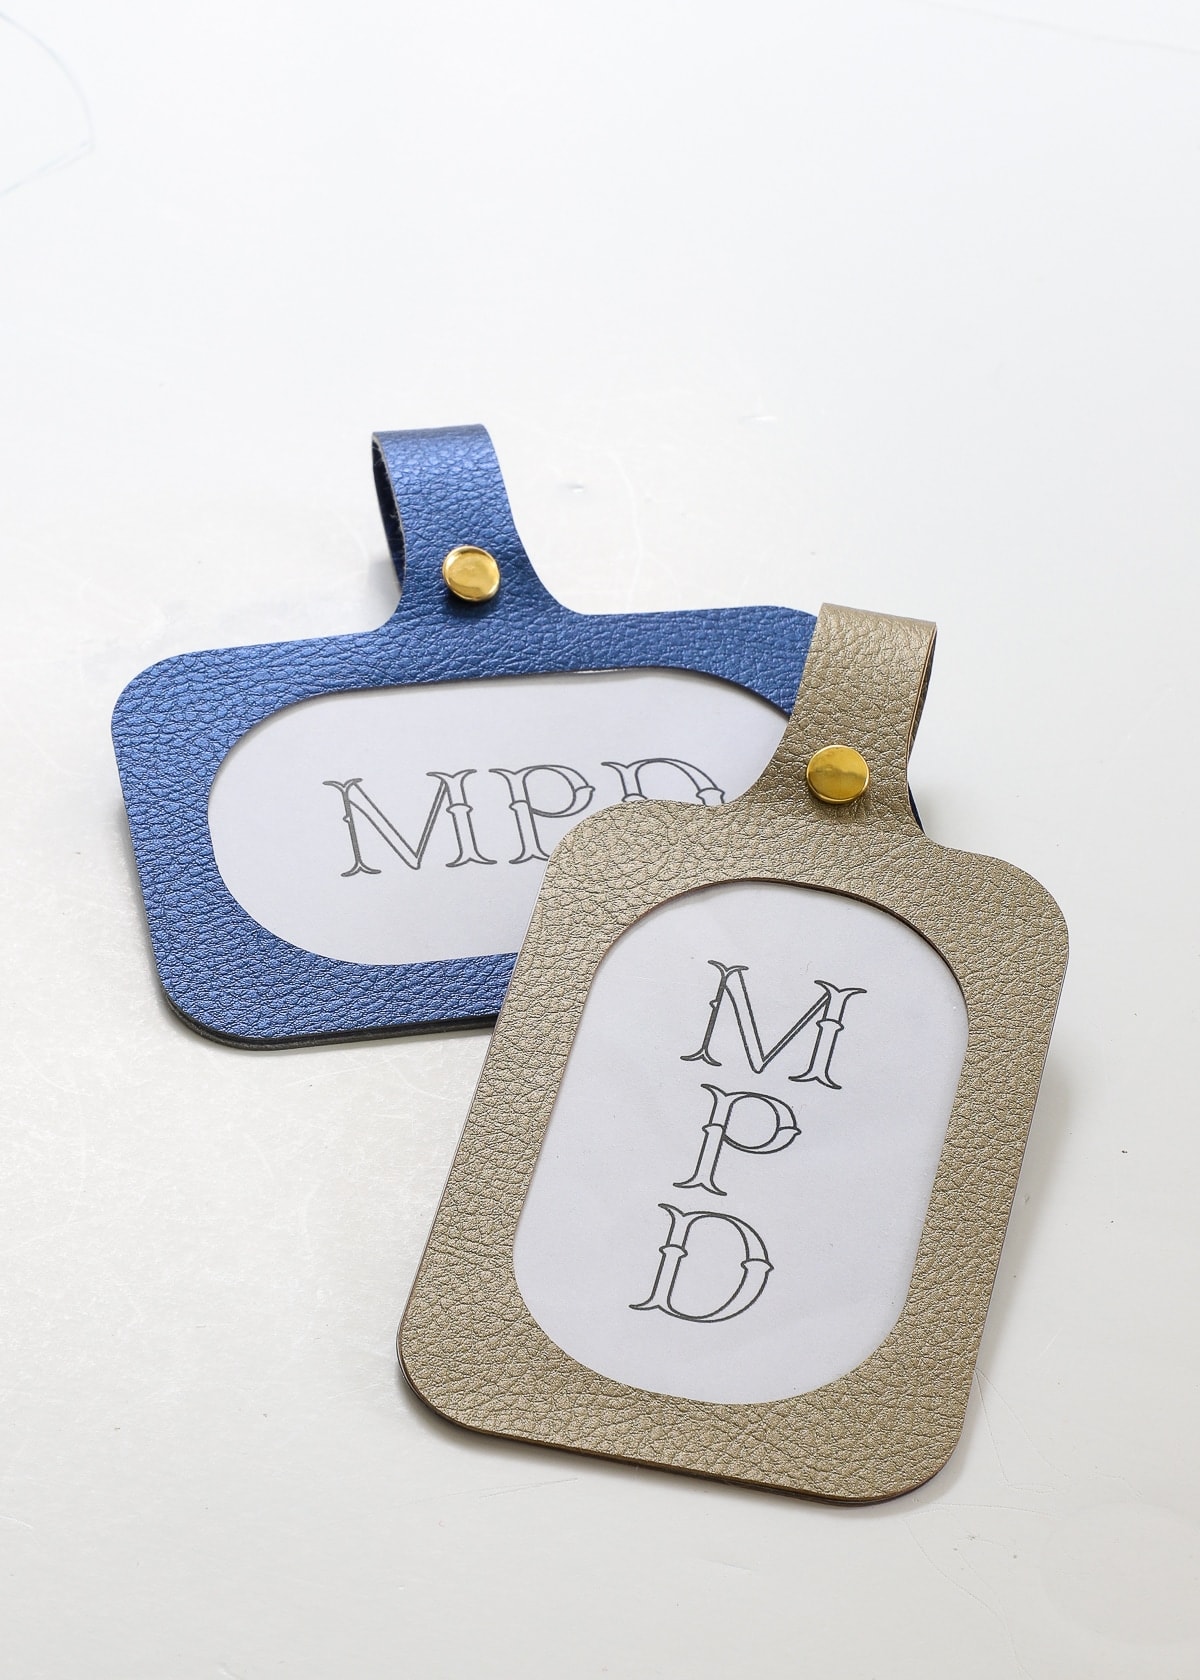 Blue and gold luggage tag labels with monograms